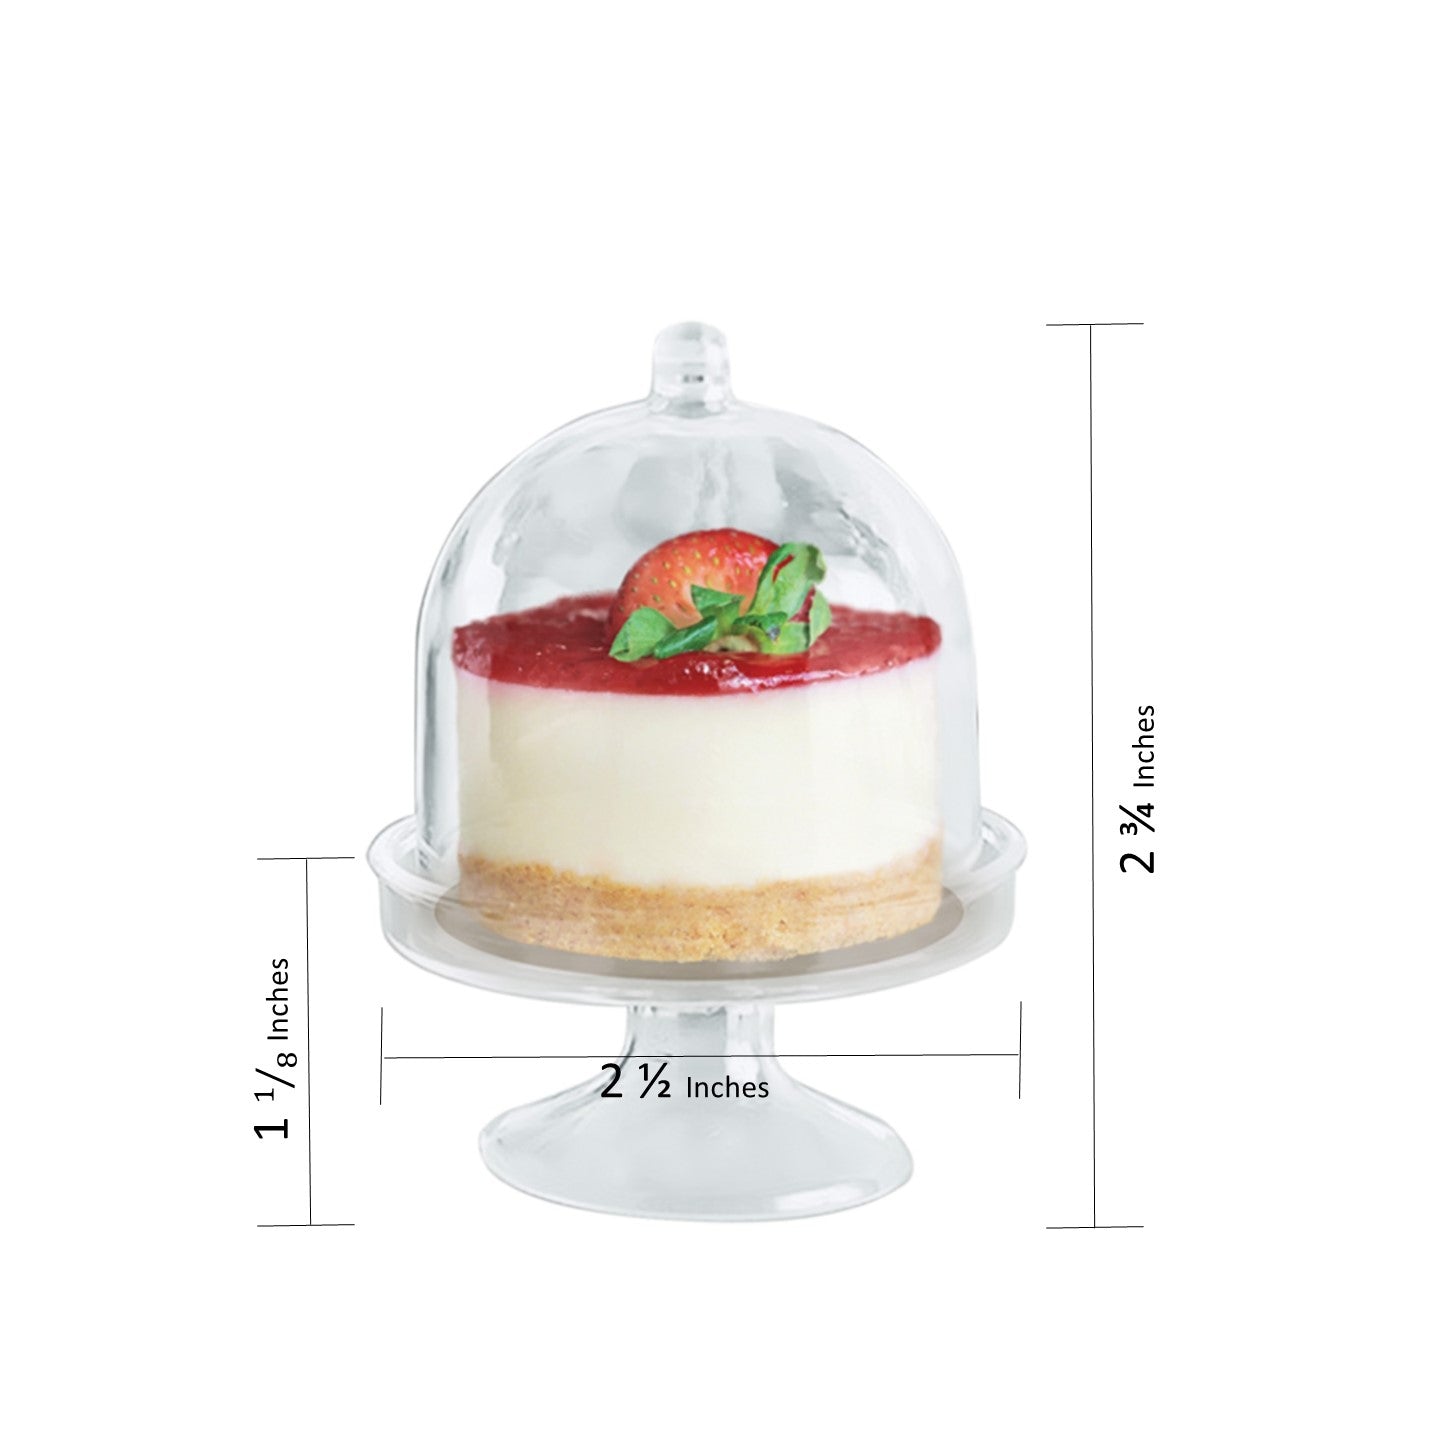 Cake stand cover - HENDI Tools for Chefs